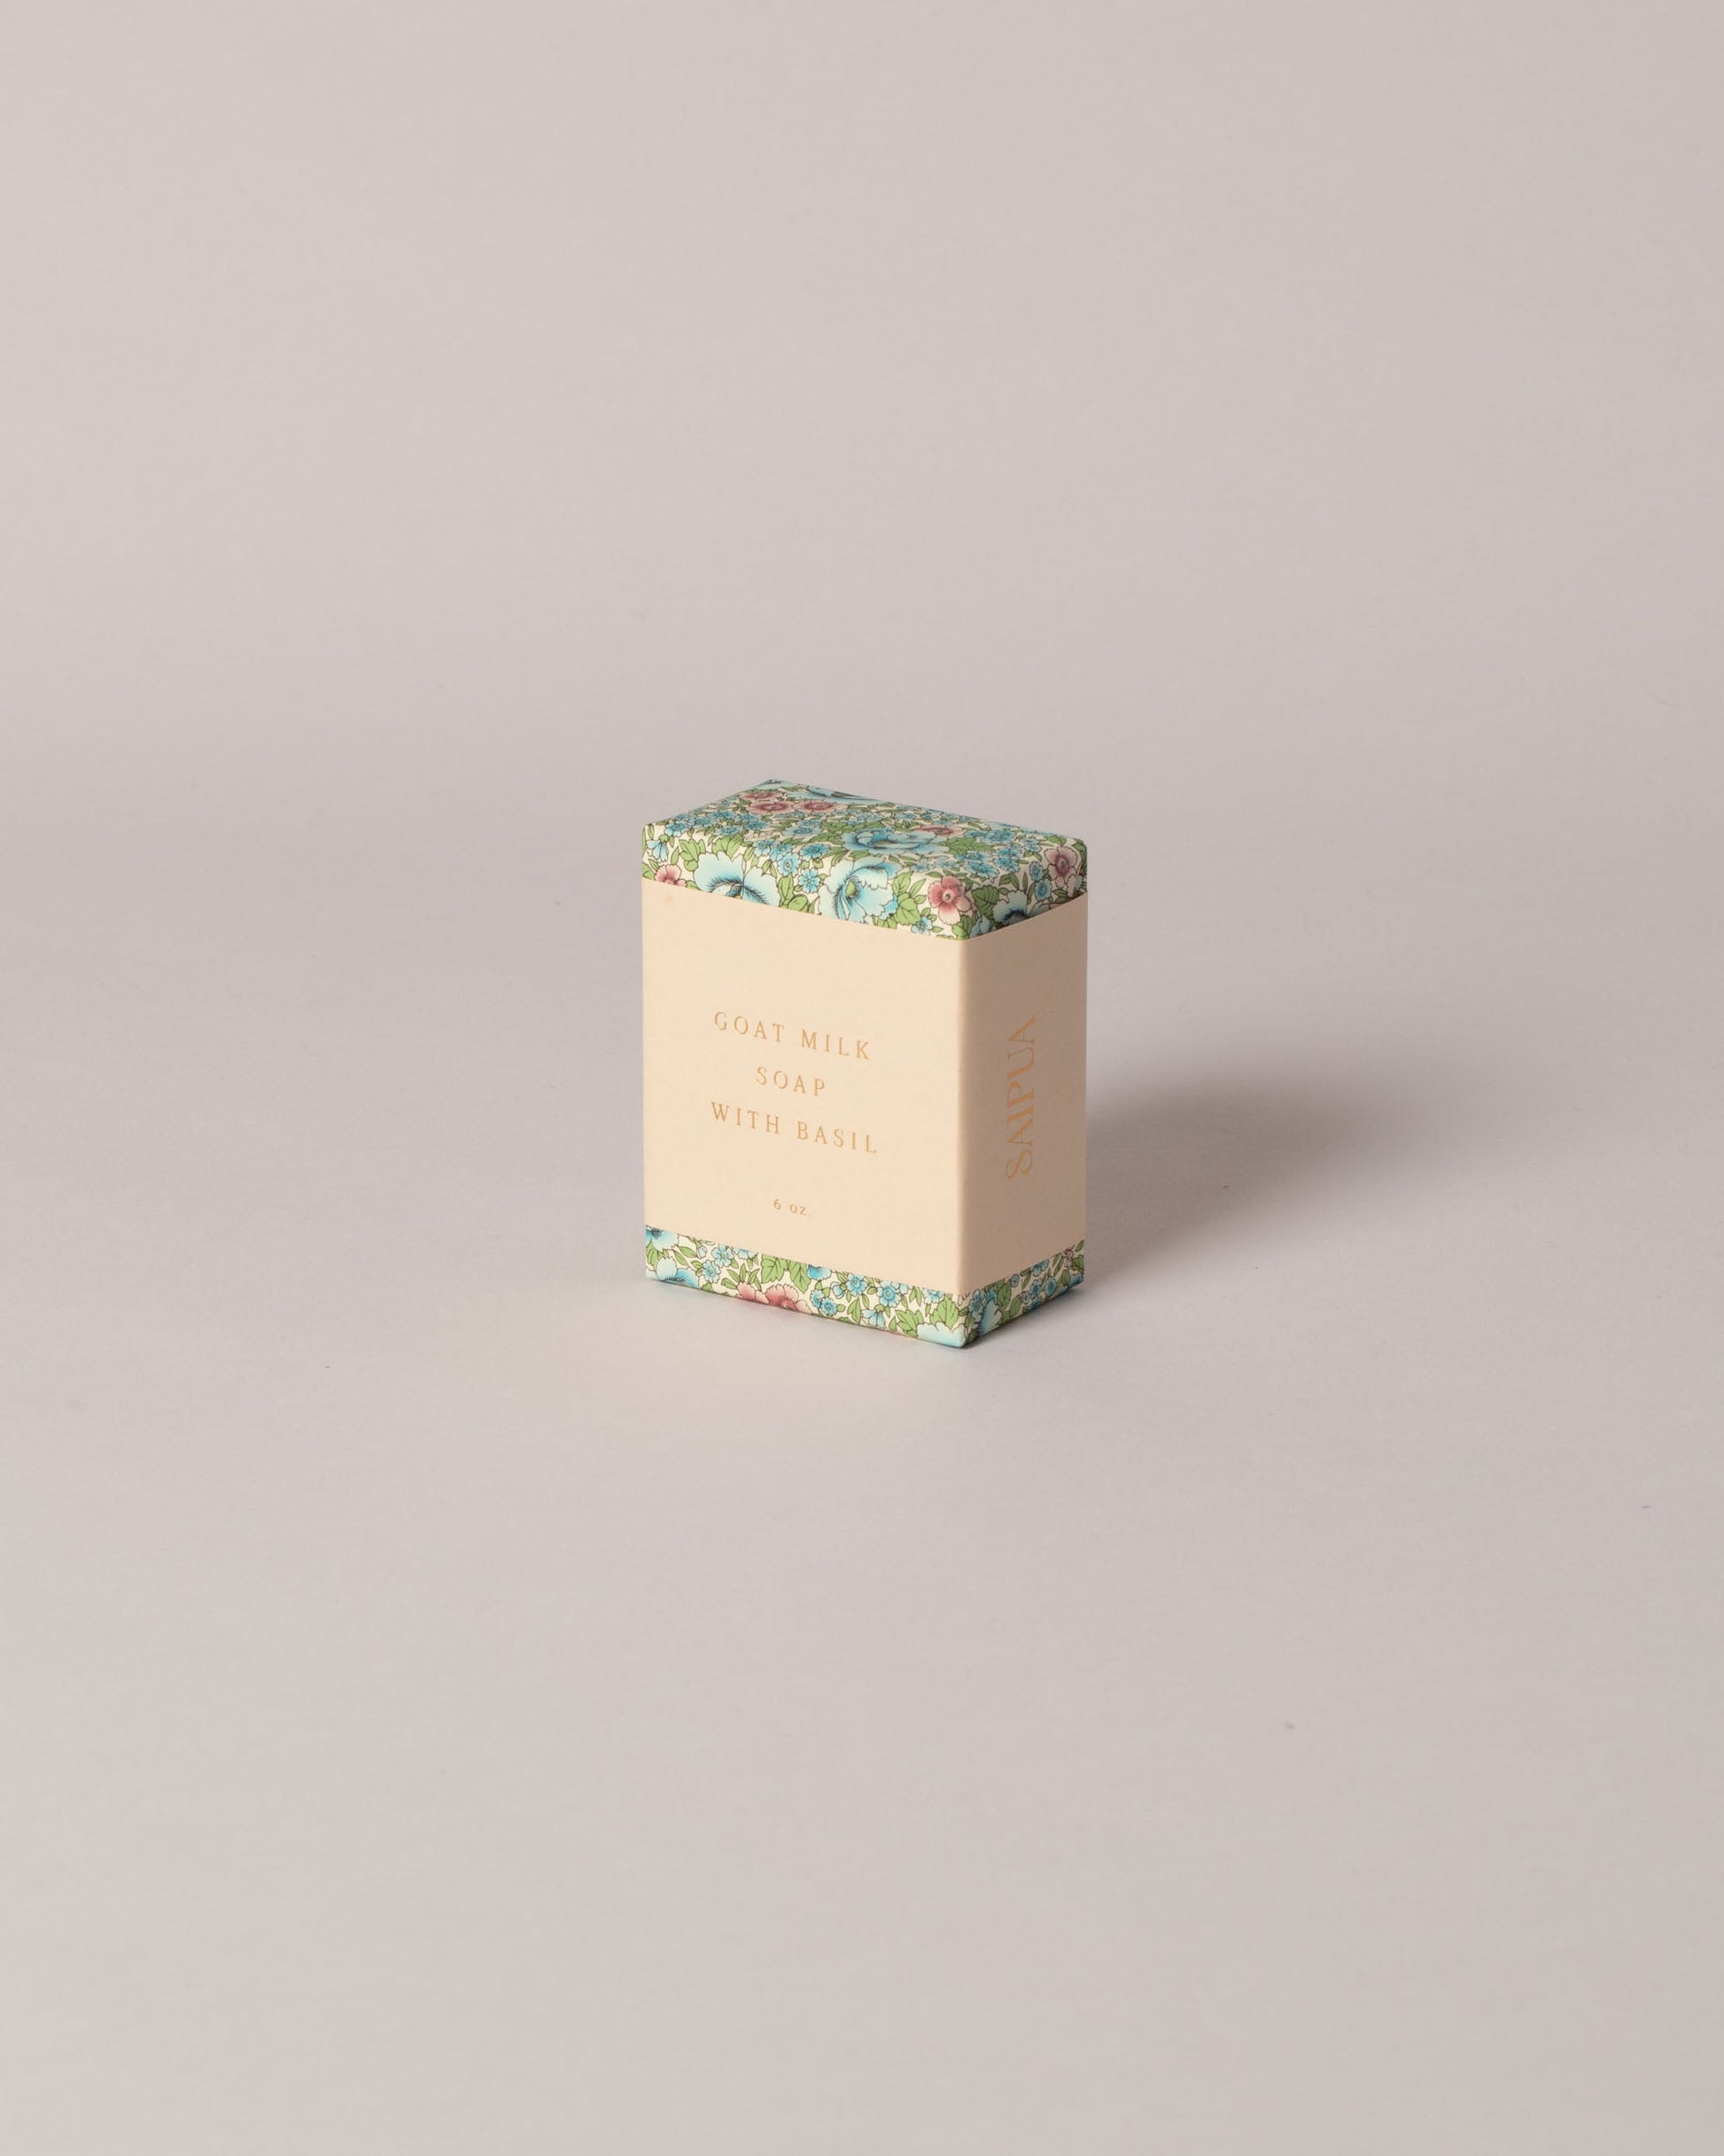 Saipua Goat Milk with Basil Soap on light color background.